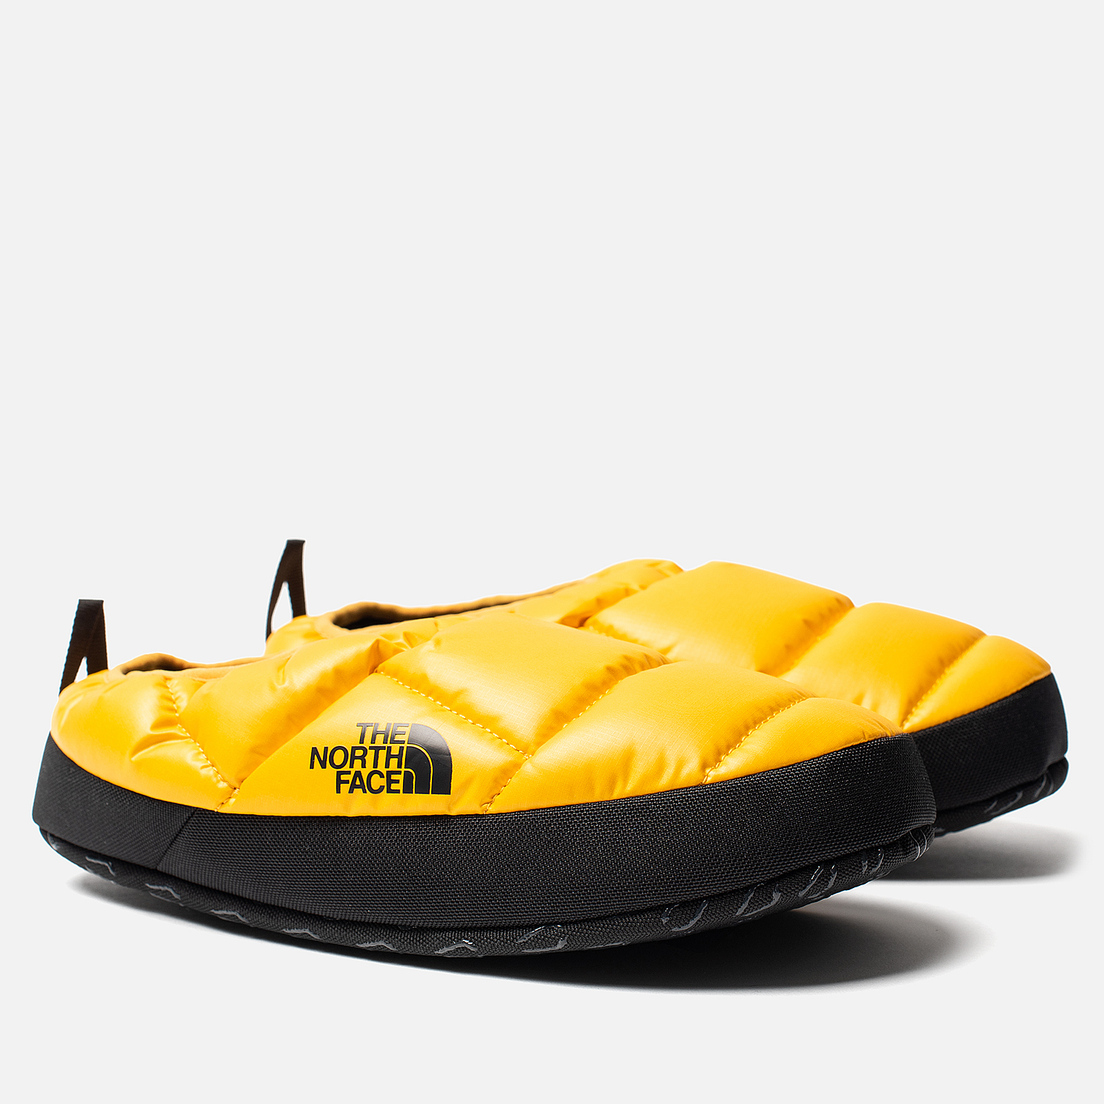 north face yellow tent